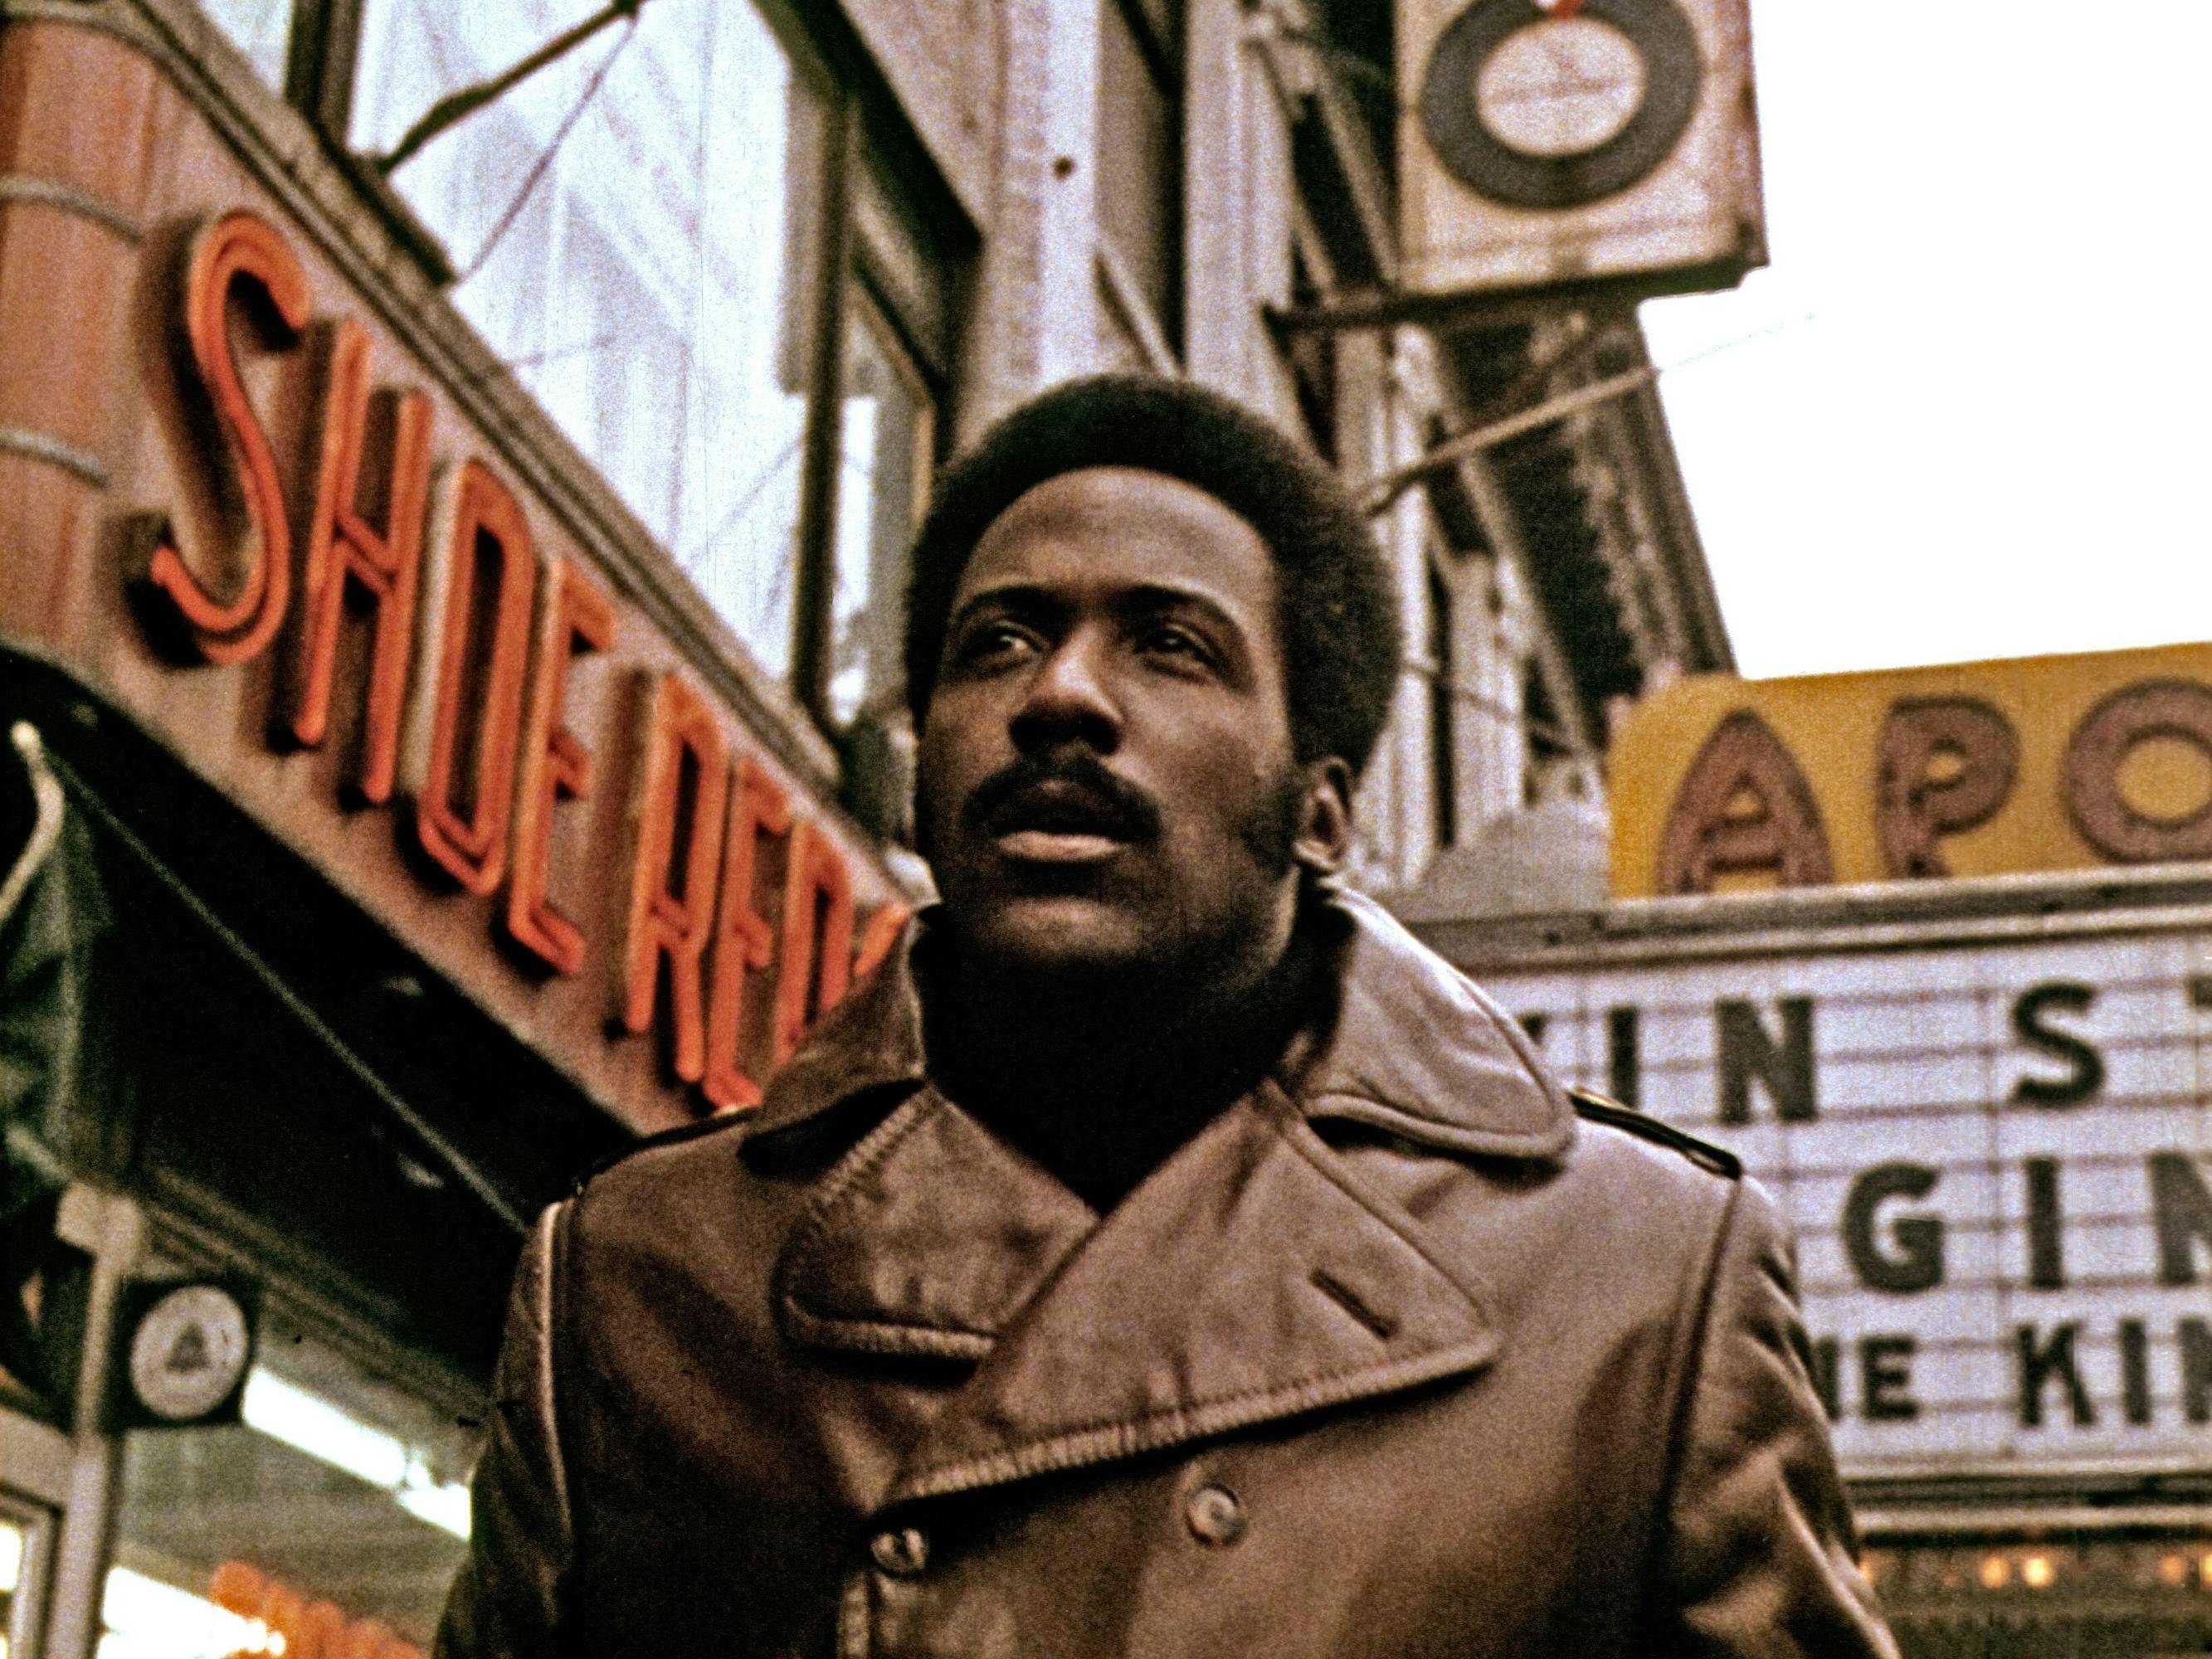 John Shaft (Richard Roundtree) wears a brown leather jacket and walks through New York City. 